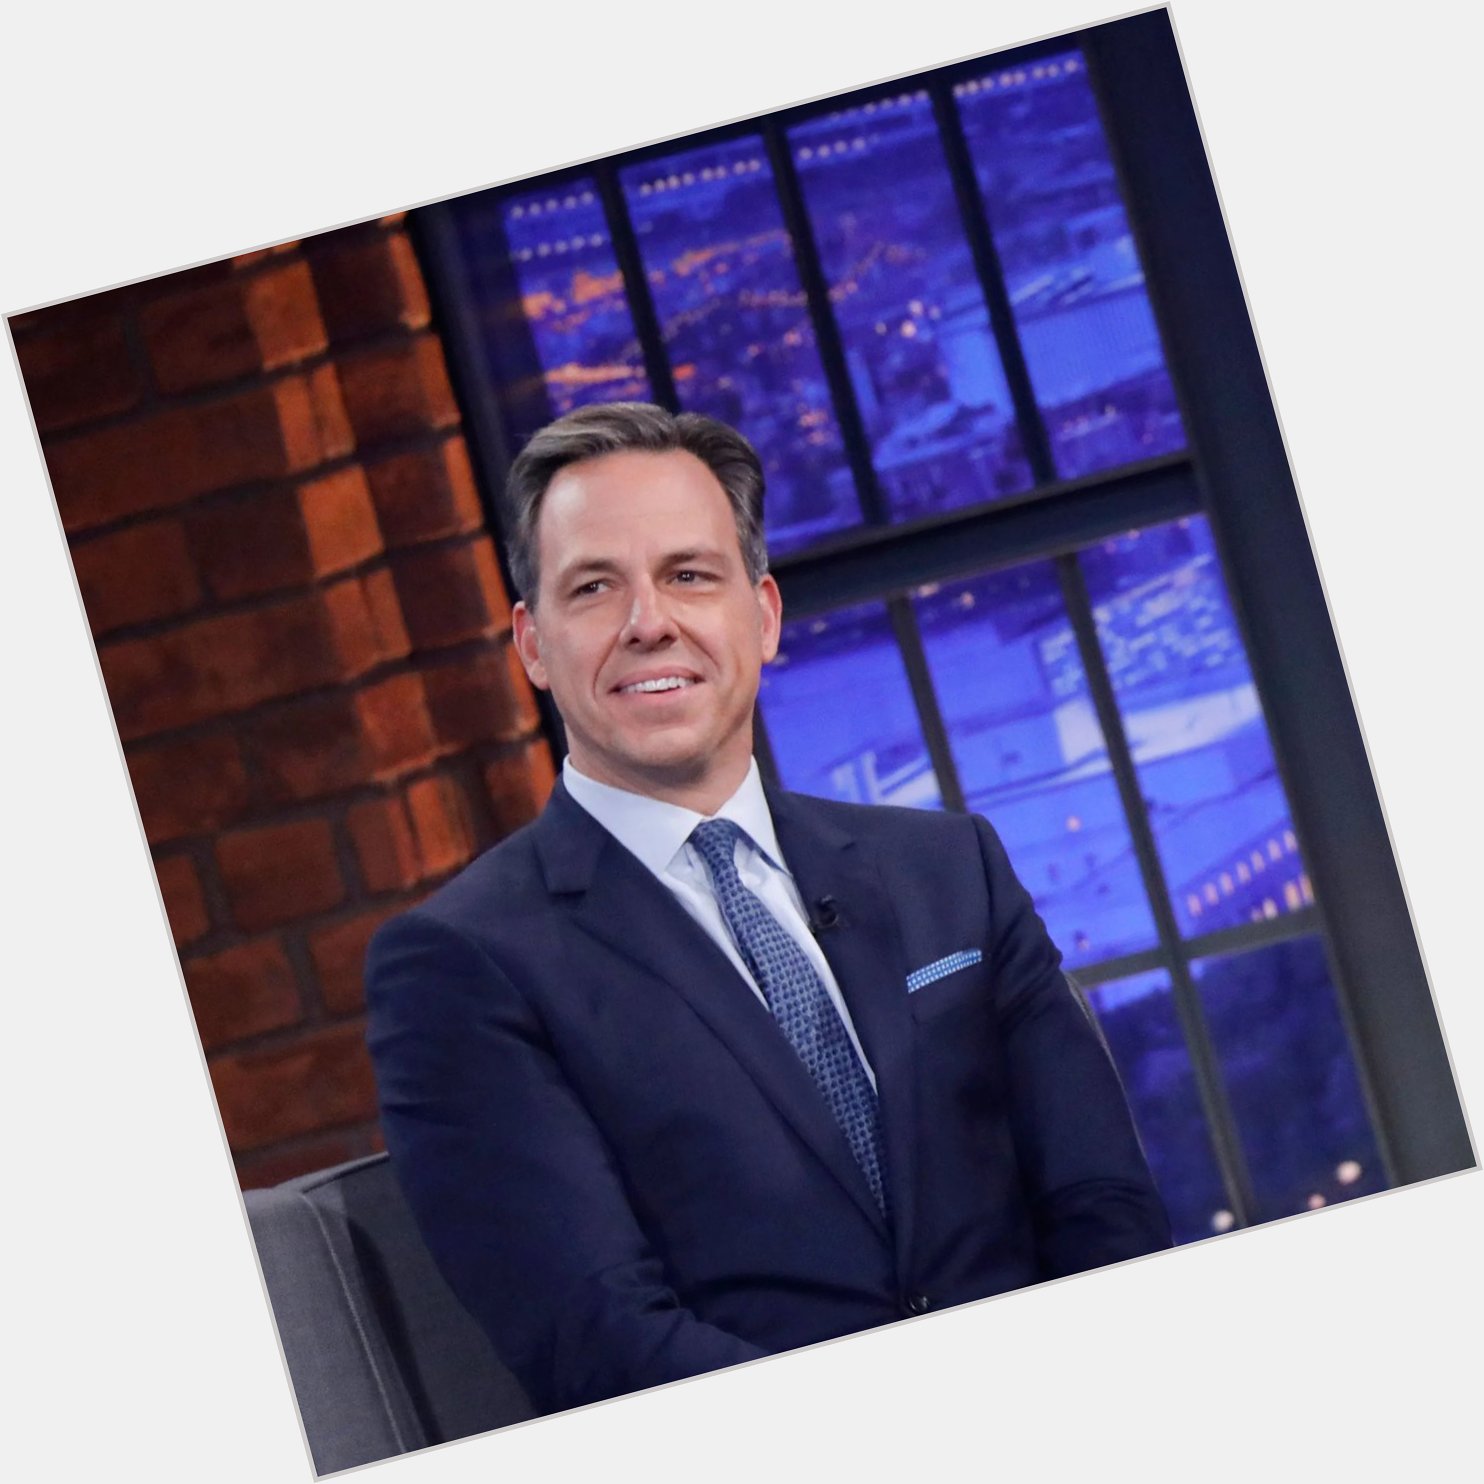 Jake Tapper, American journalist and author 1969. Happy Birthday Jake! 